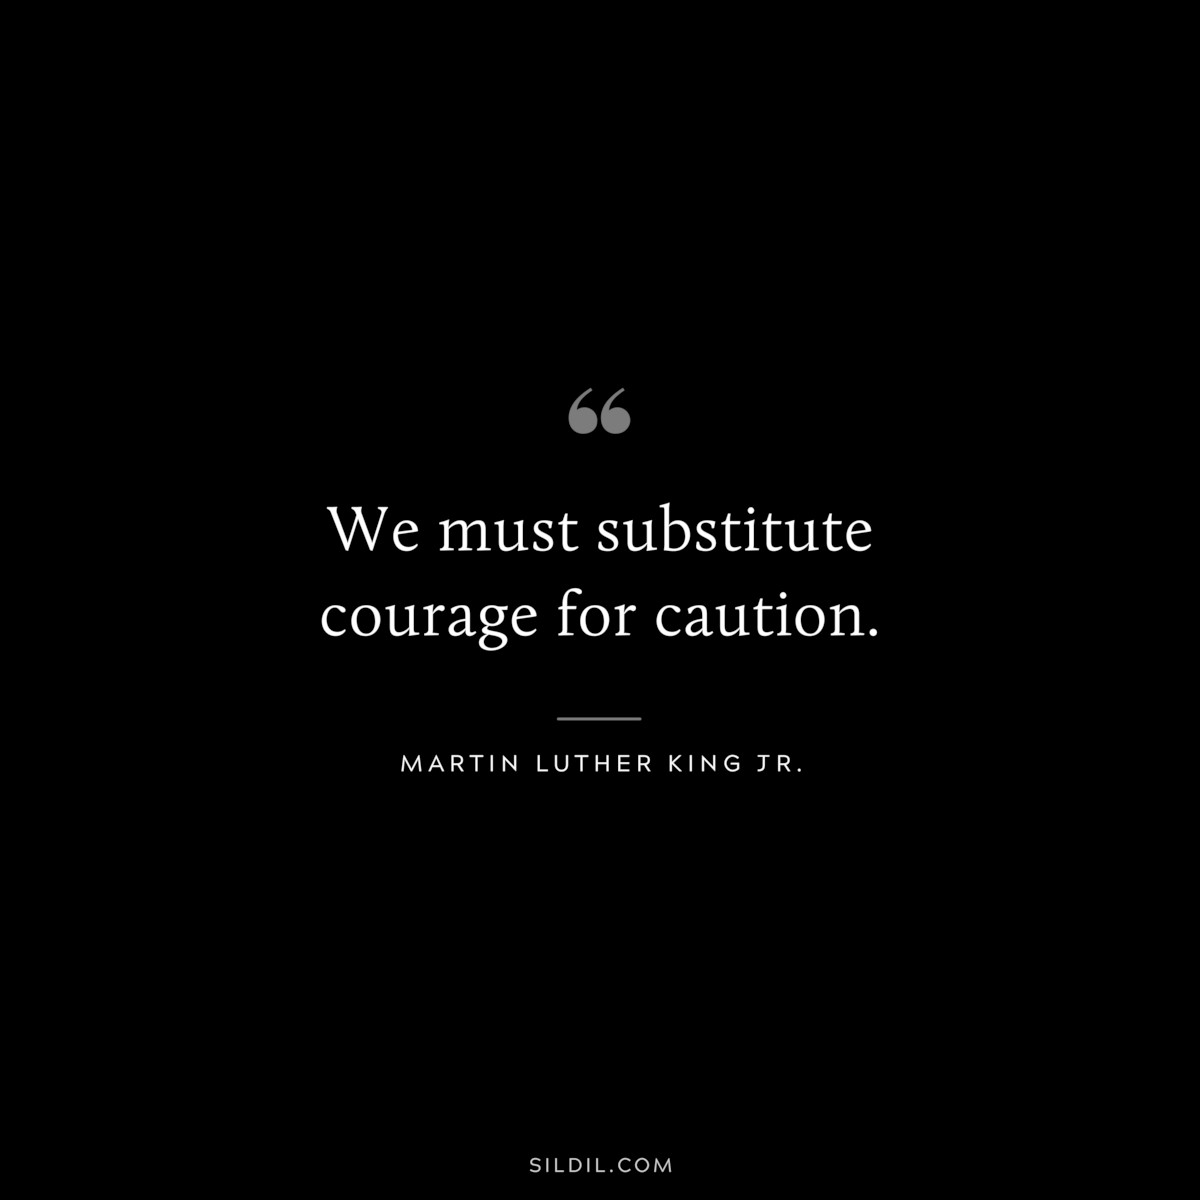 We must substitute courage for caution. ― Martin Luther King Jr.